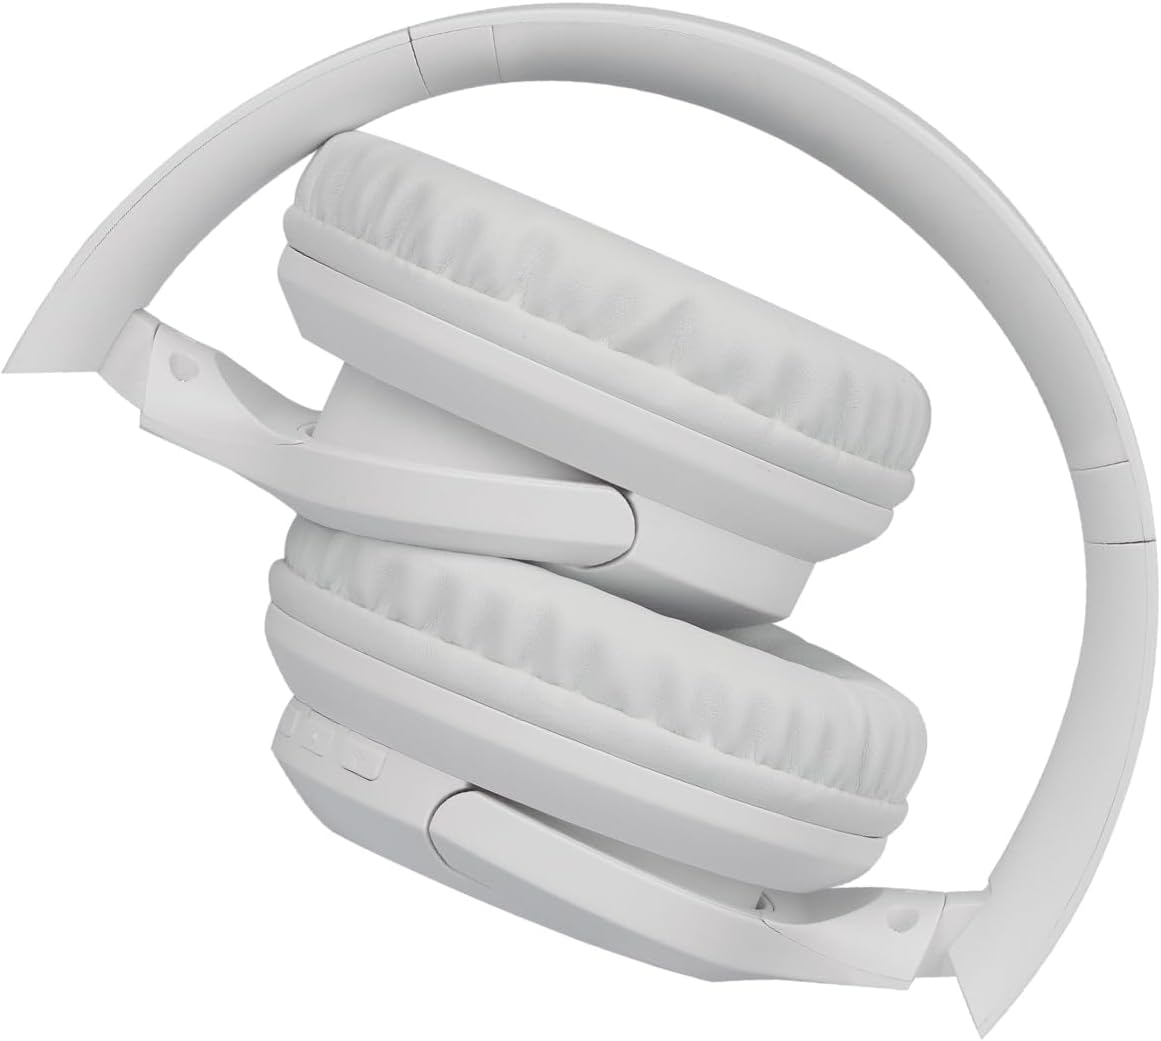 Moodix ANC Bluetooth On-Ear Headphones, Active Noise Cancelling Wireless Headphones Android and iOS Compatible, Over-Ear Loud Headphones with Deep Bass (White)